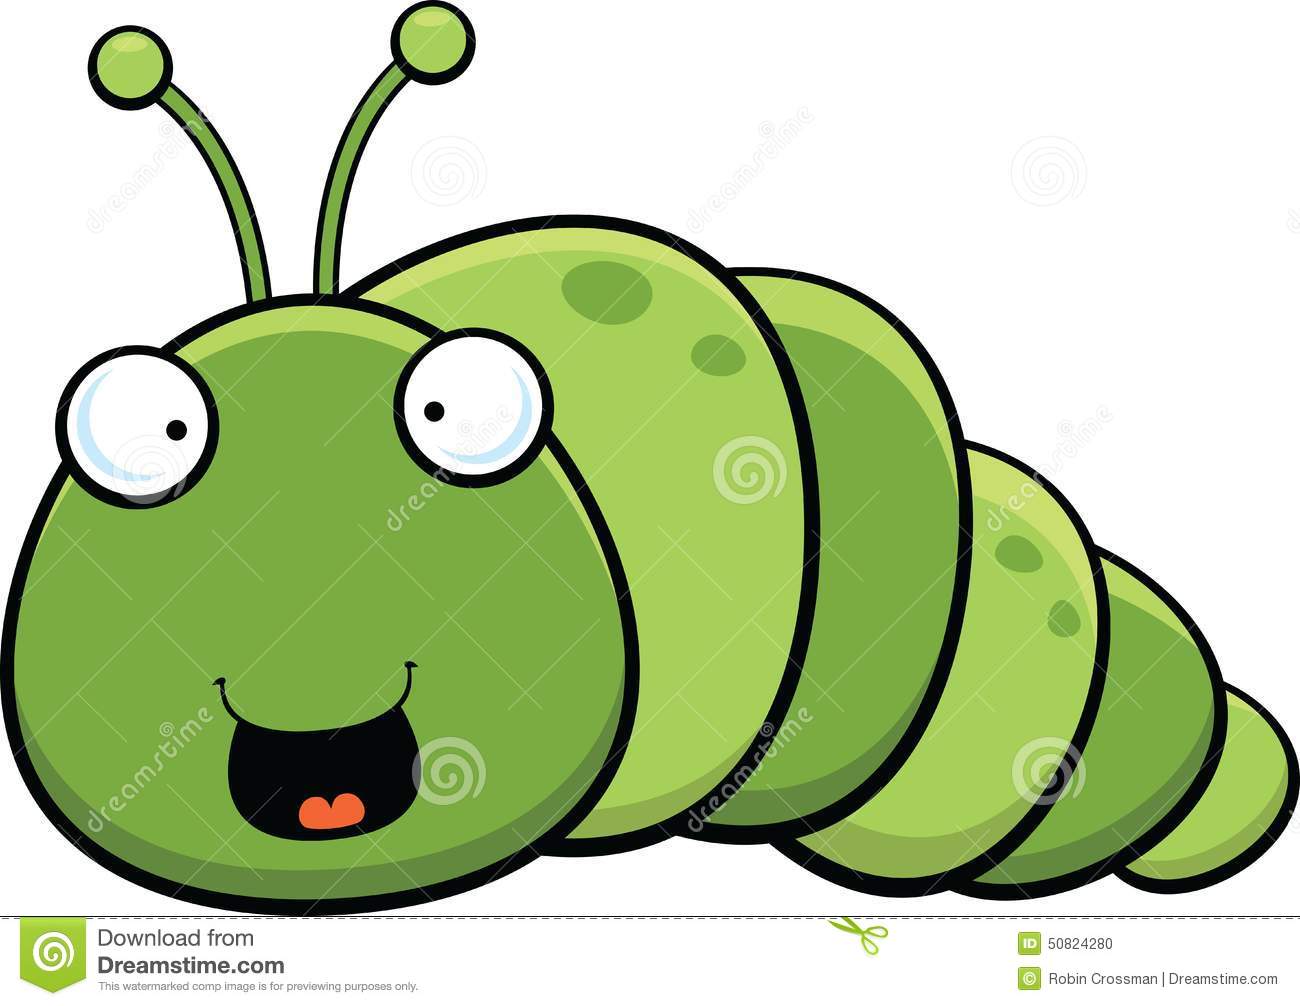 Cartoon Illustration Of An Inch Worm With A Happy Expression